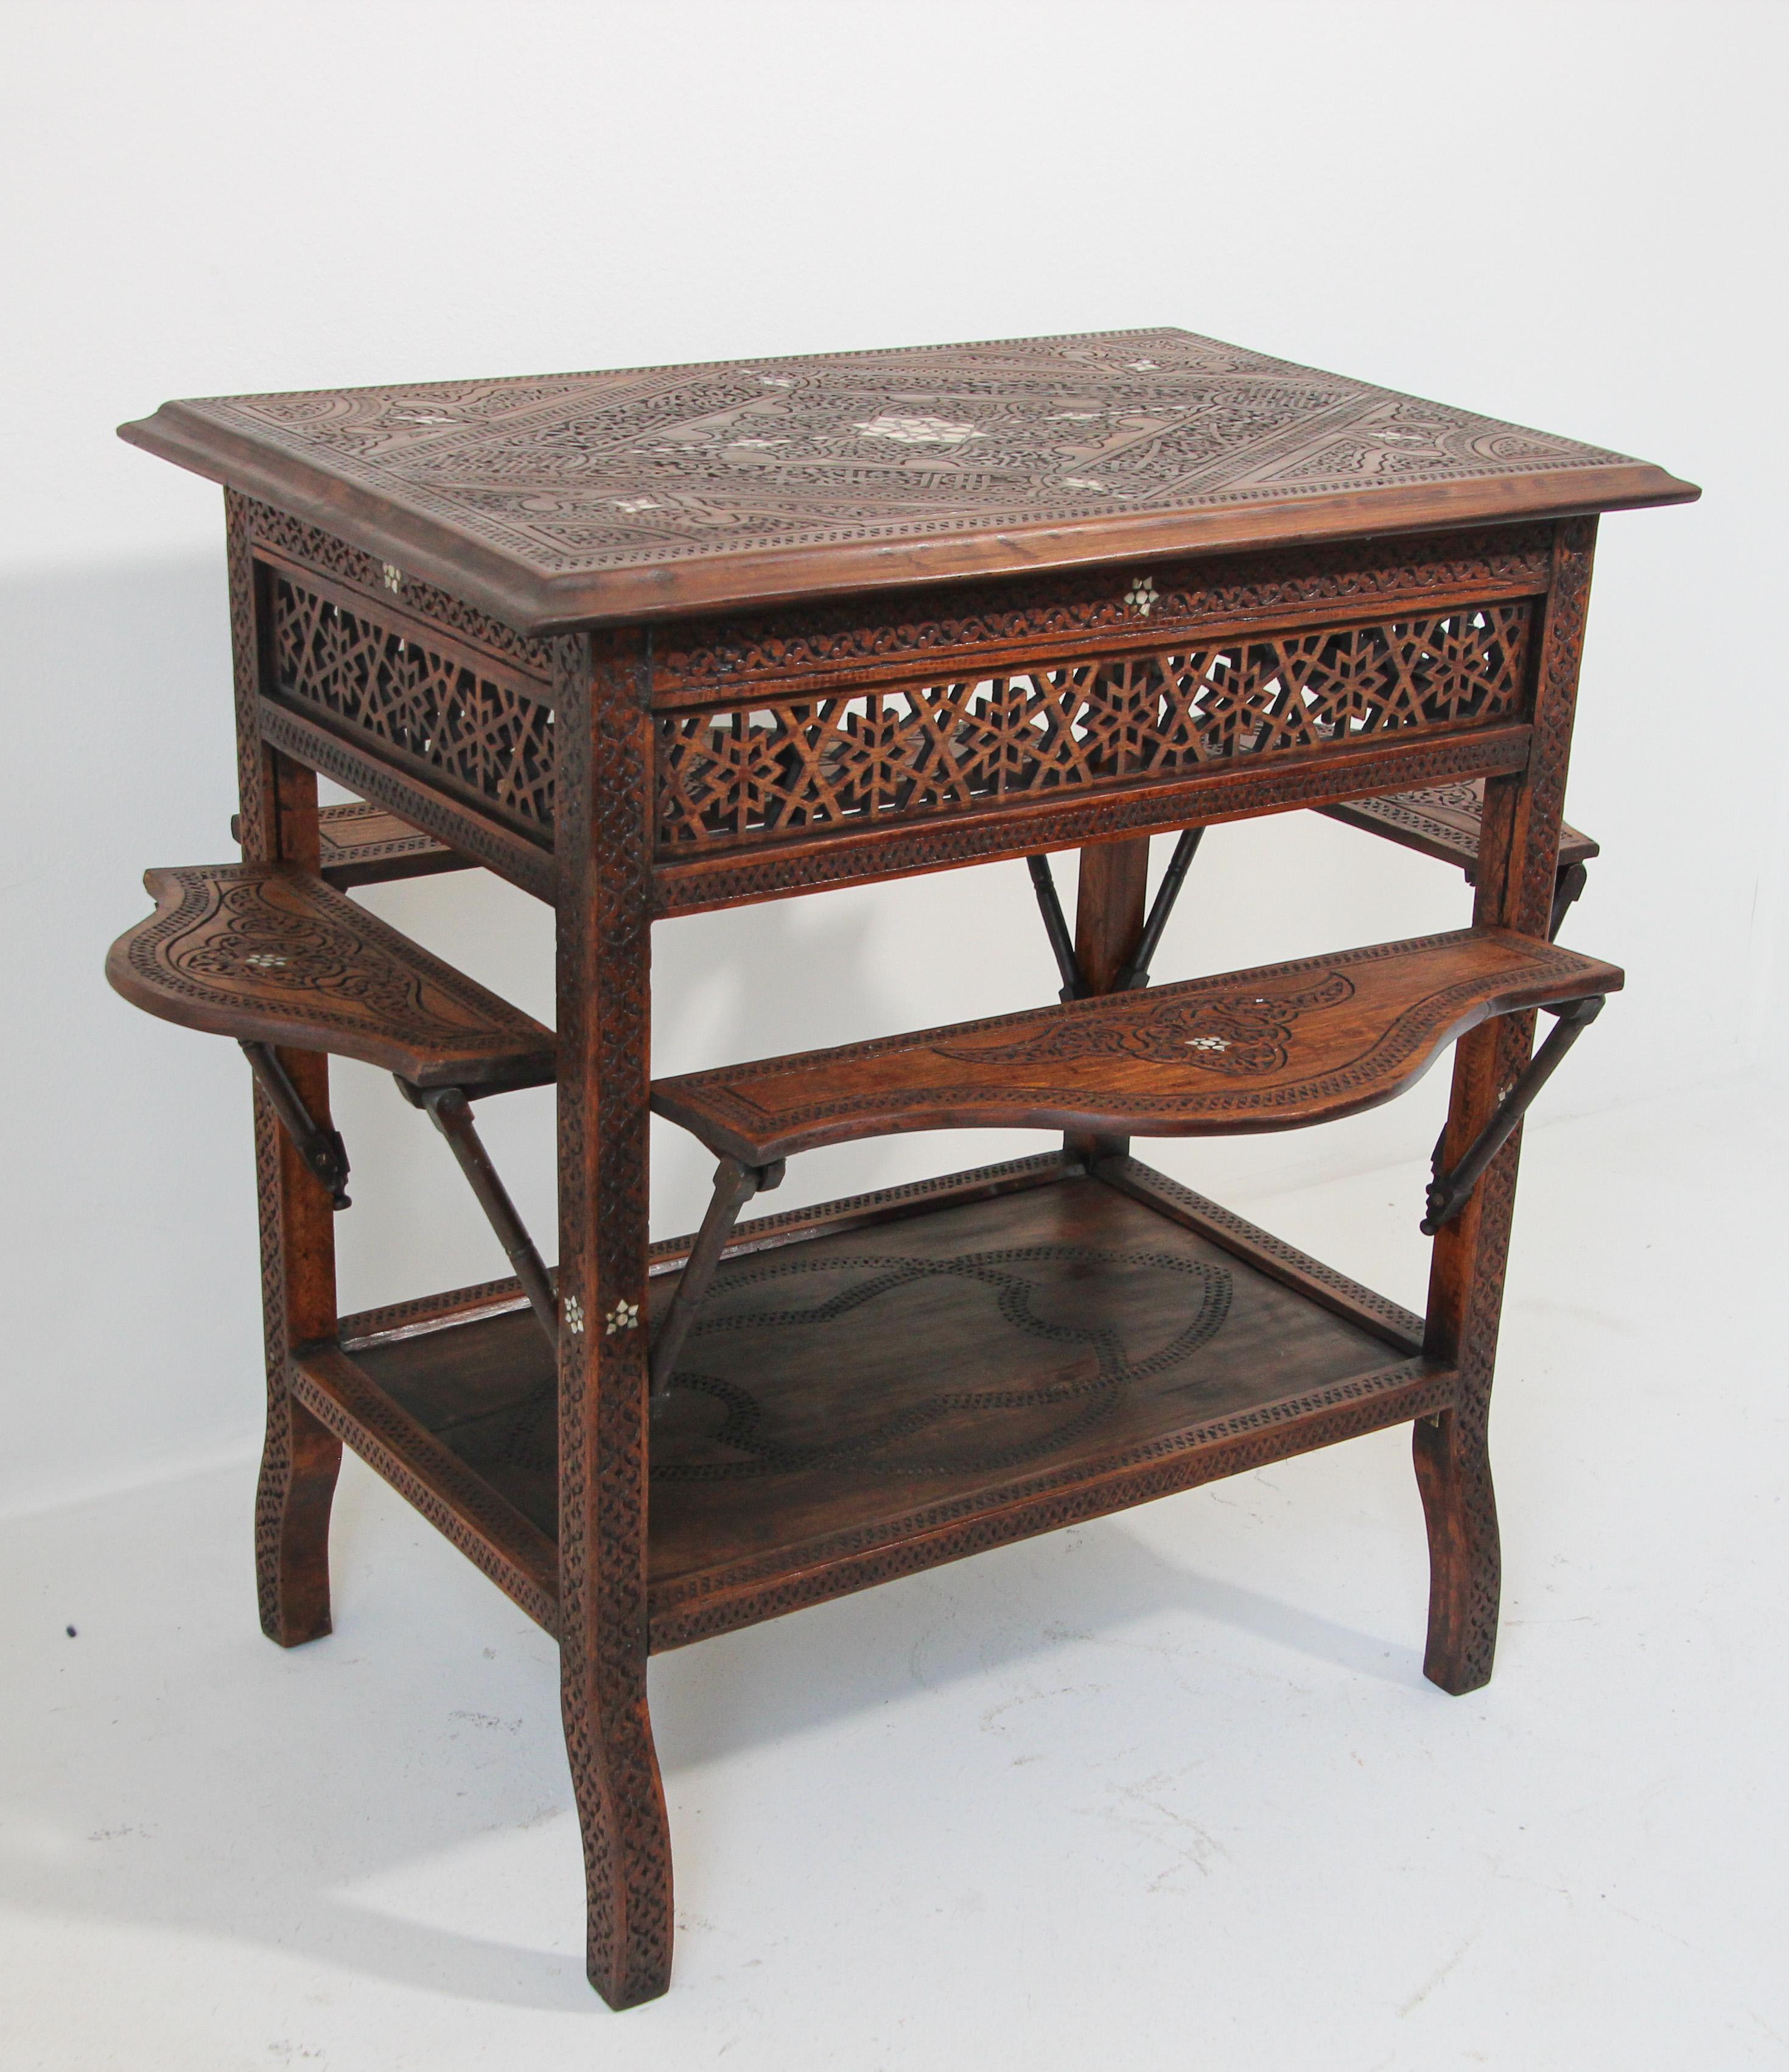 Moorish tea table, finely hand carved with foliages, arabesque design and Arabic writing, inlaid and carved in Moorish designs, 
The sides on the table folds and open for additional space. 
The border sides are made of fine fret work, called